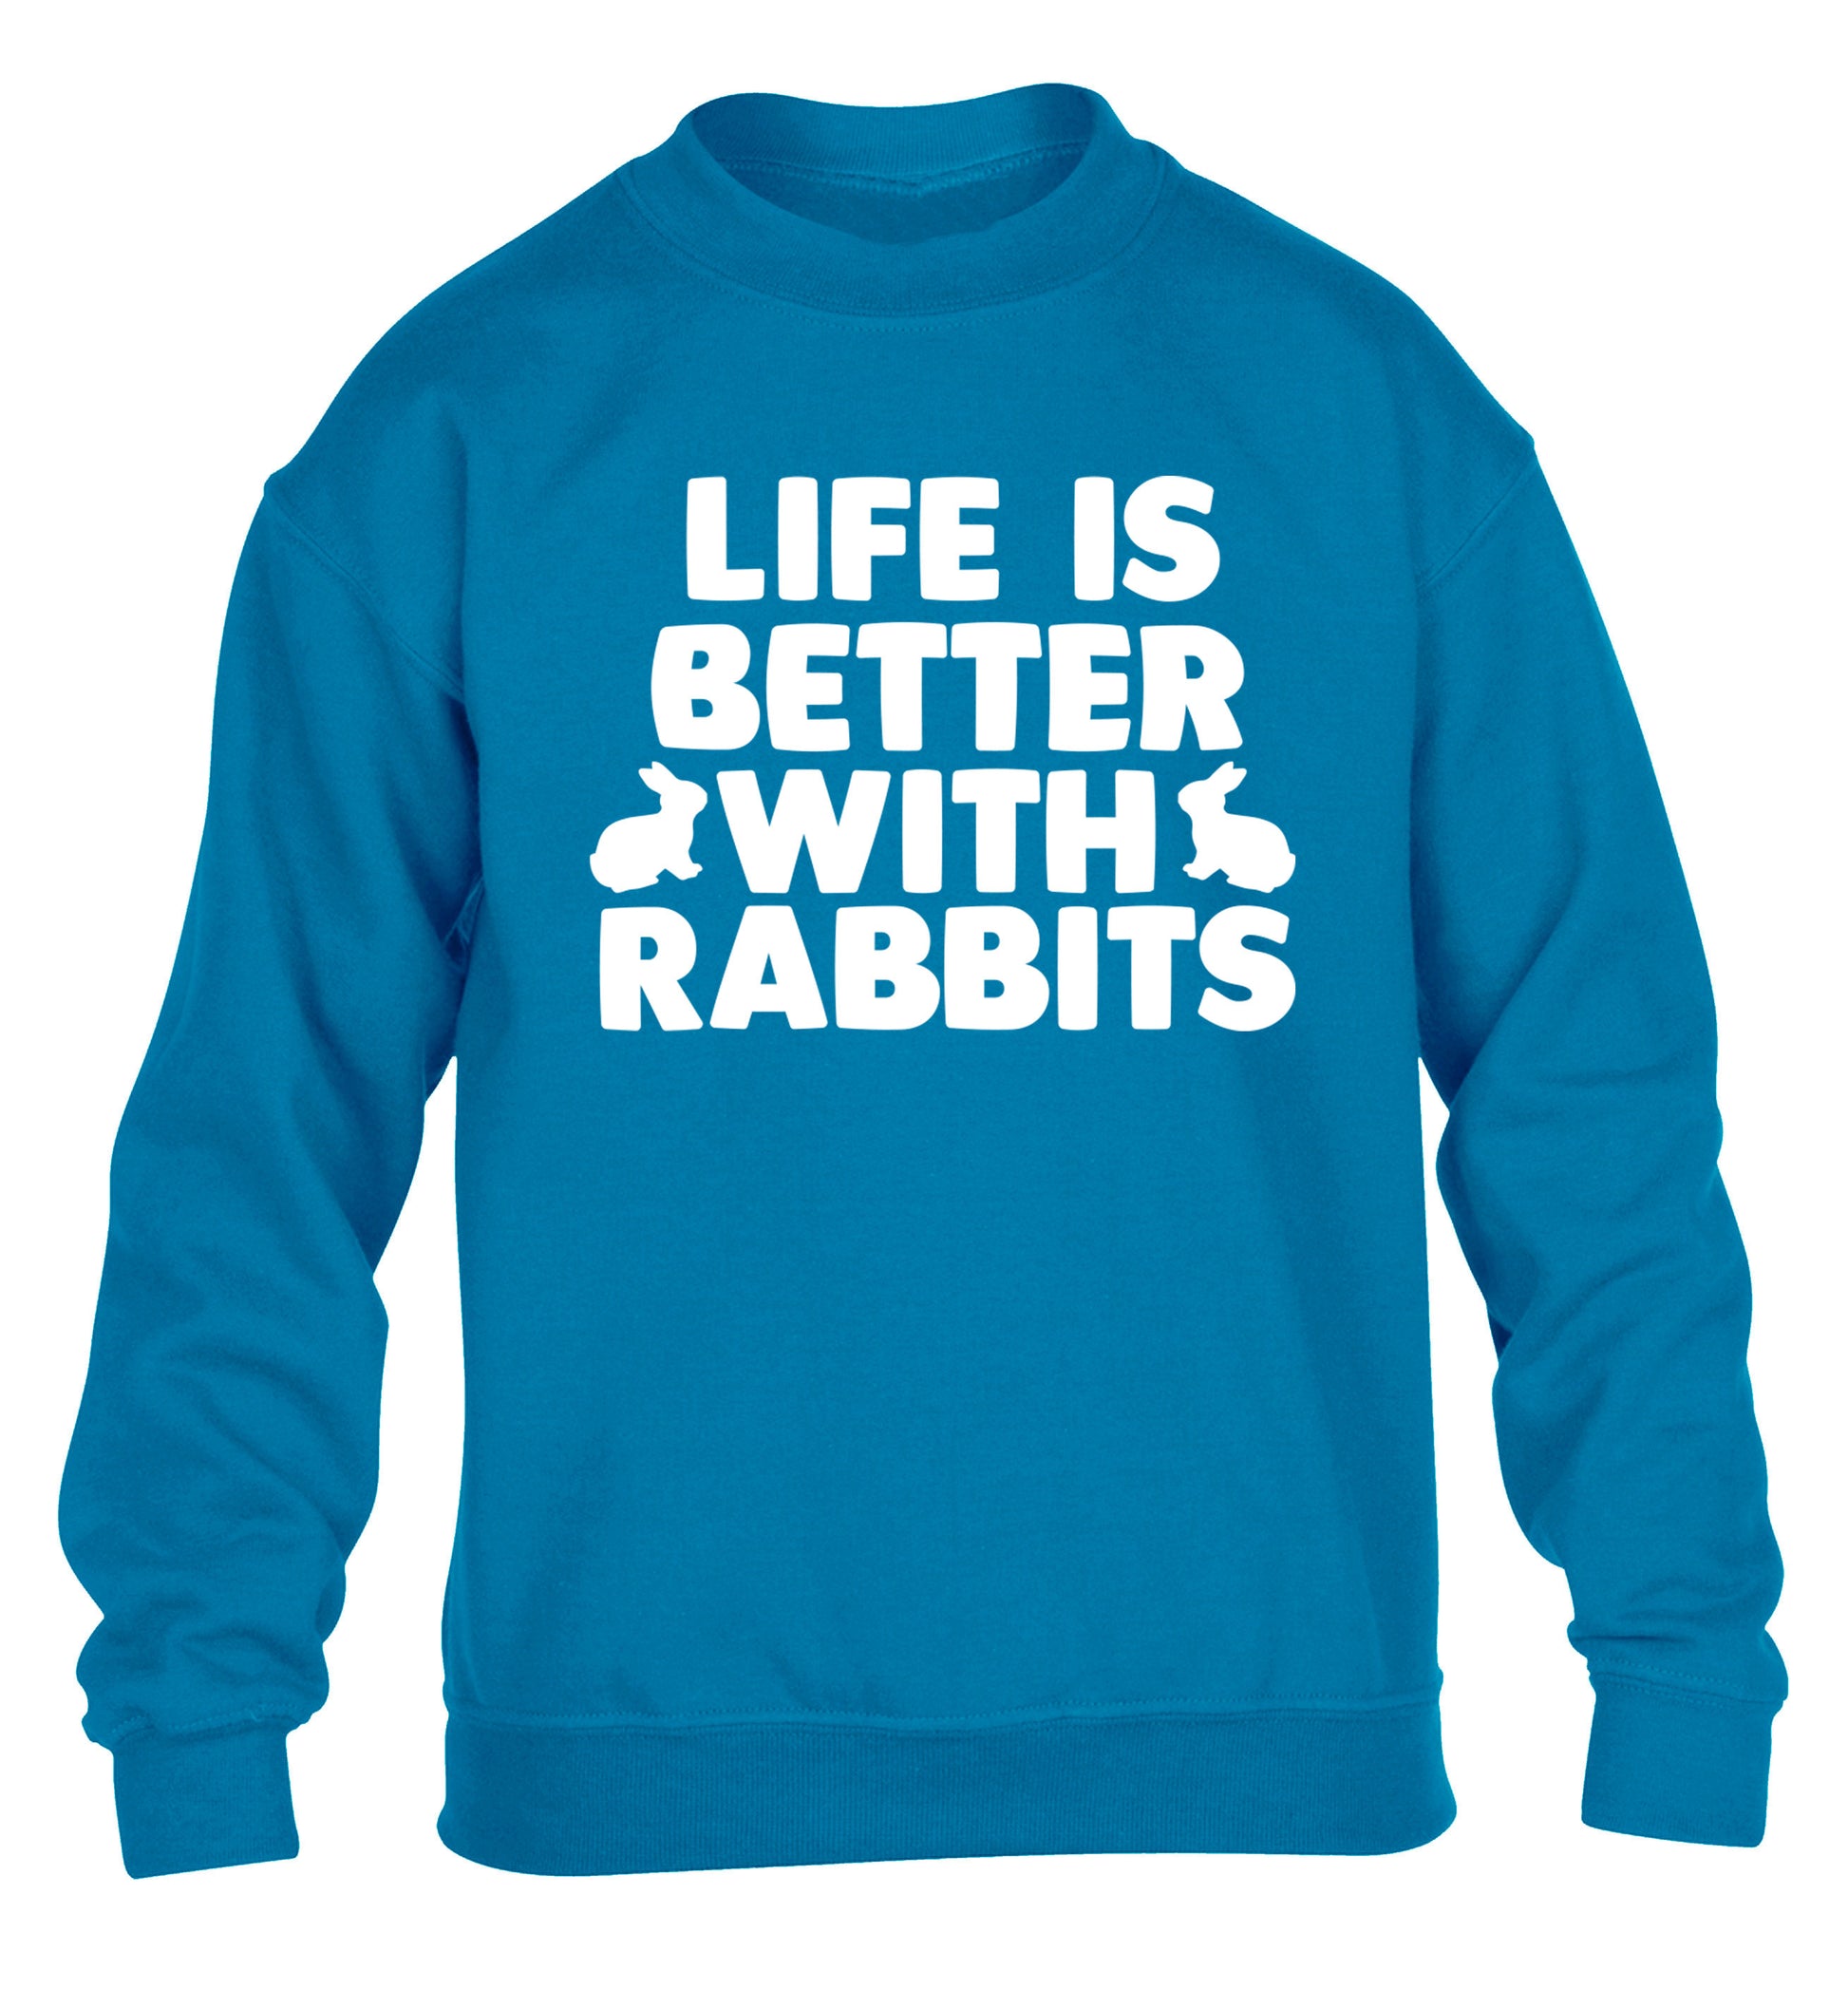 Life is better with rabbits children's blue  sweater 12-14 Years